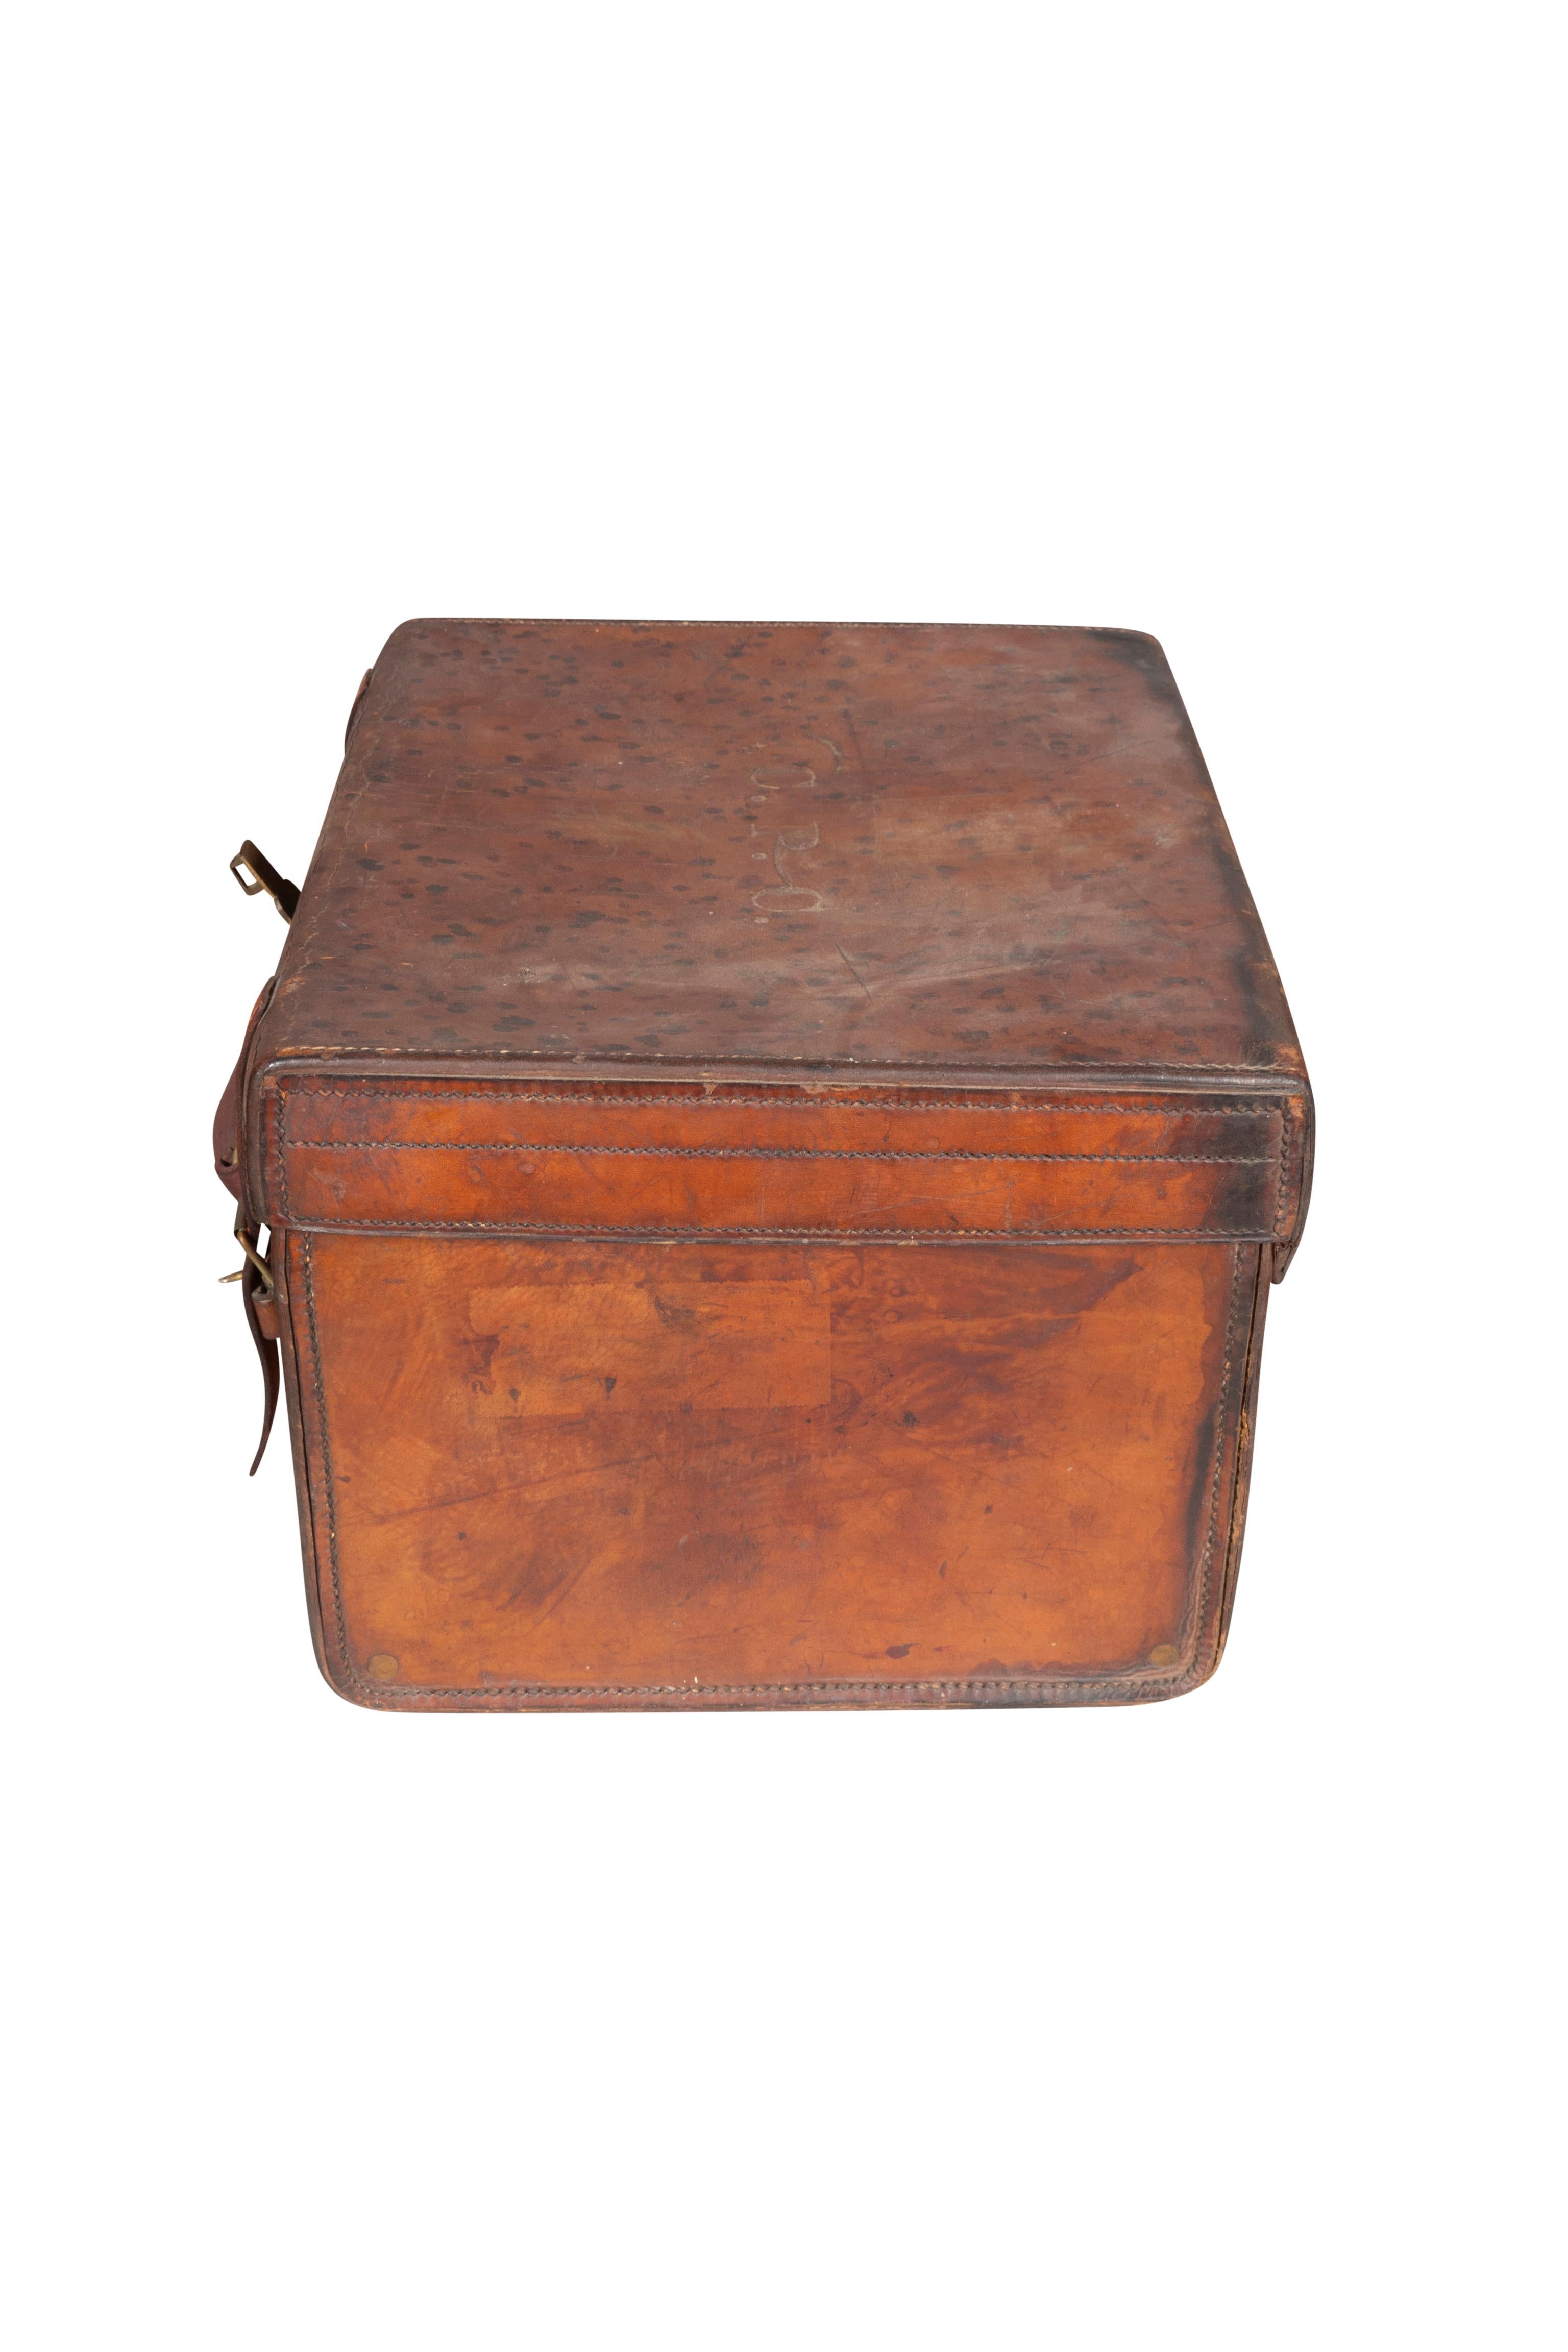 20th Century Edwardian Leather Hat Box By Herbert Johnson Of London For Sale